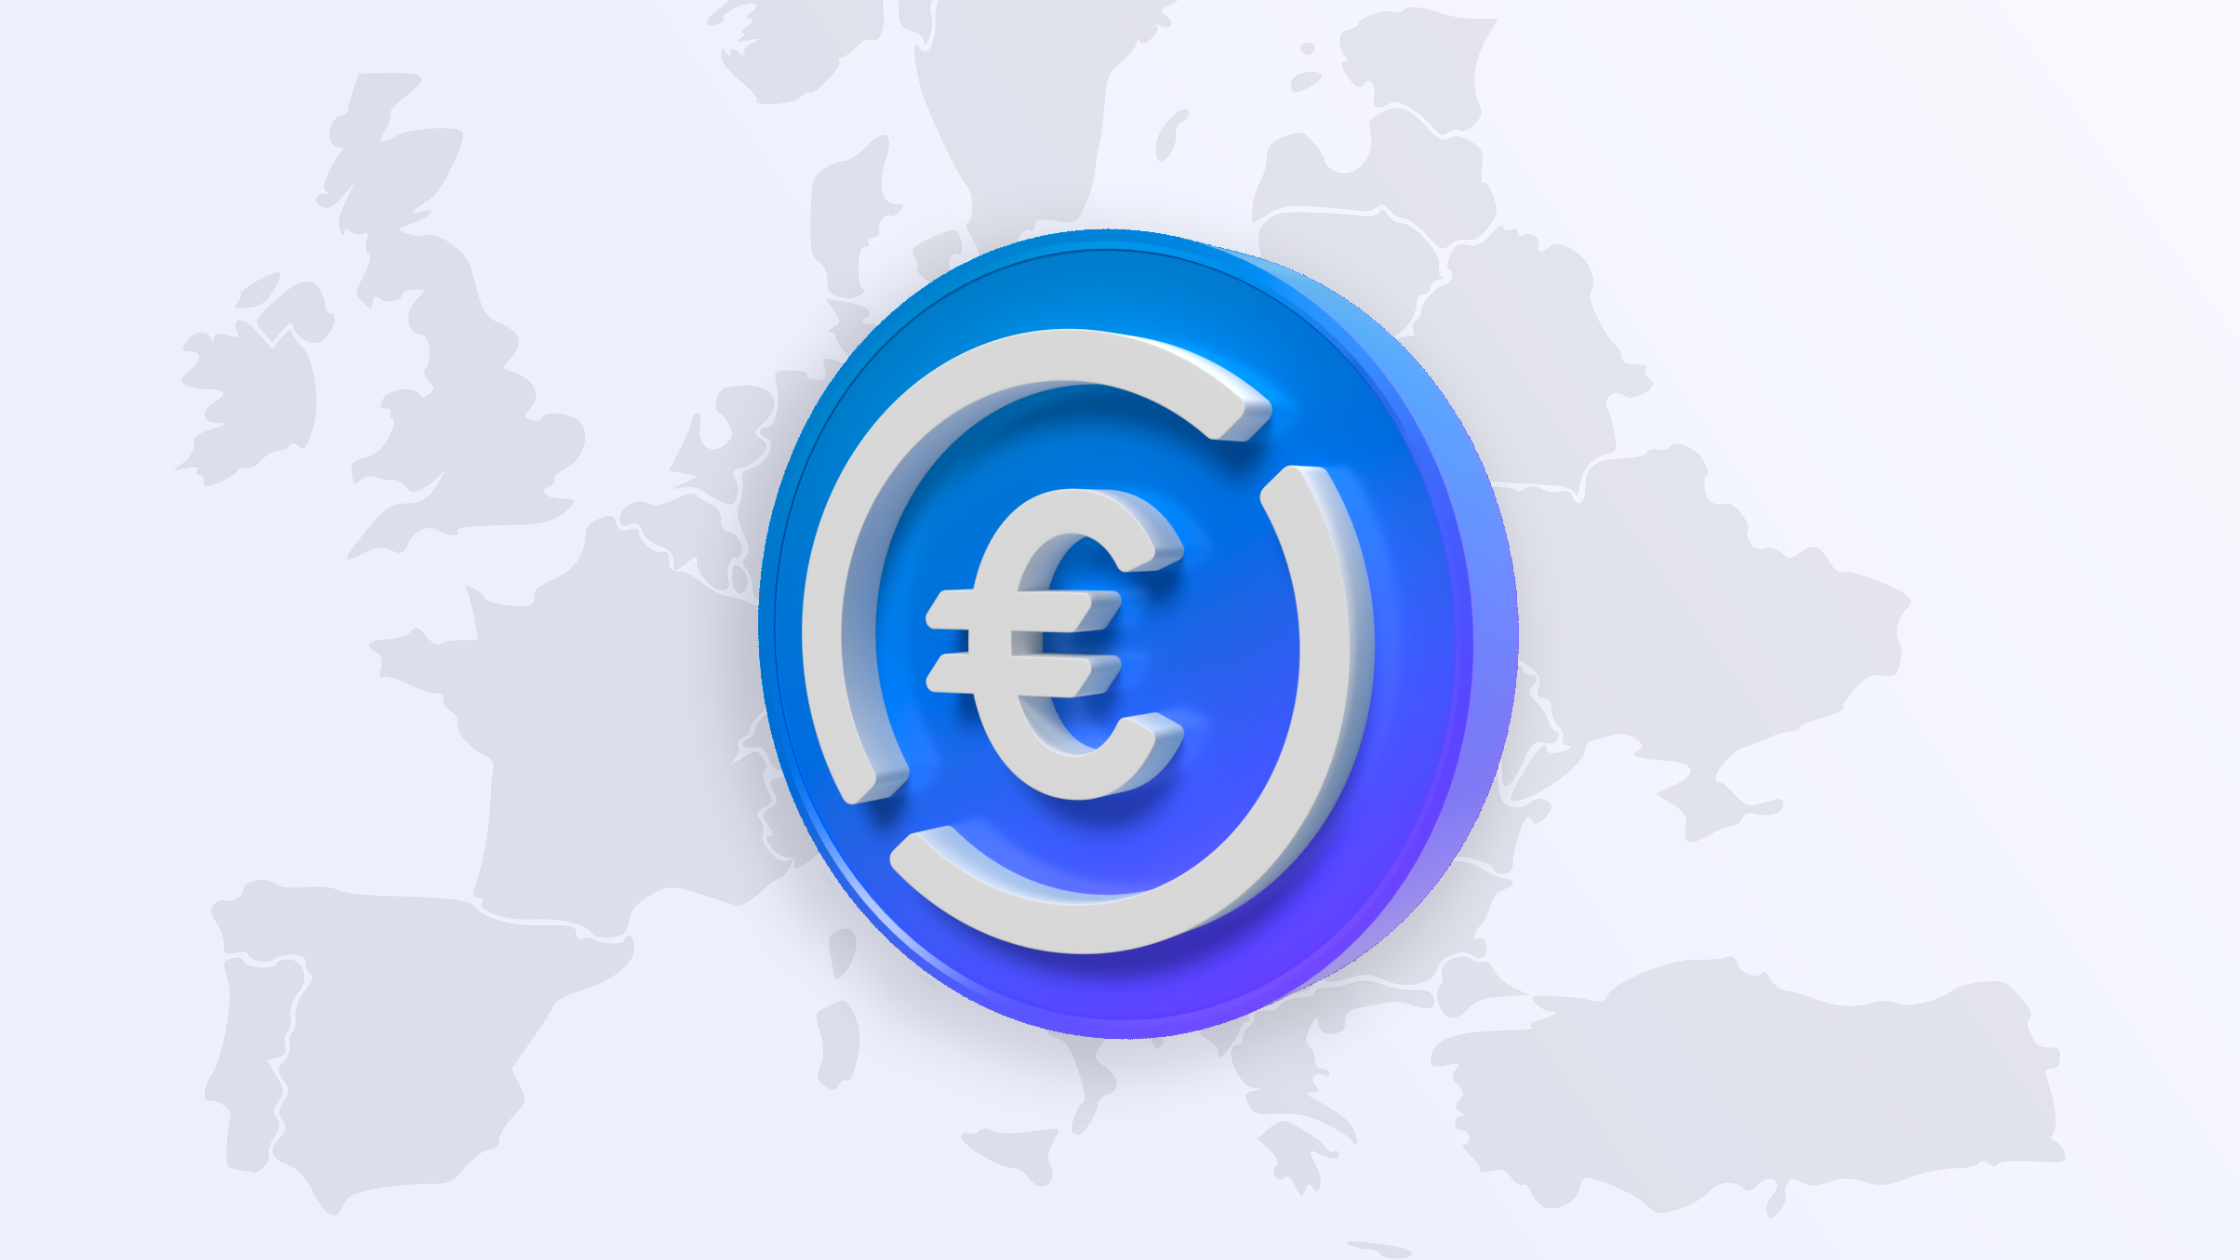 EURS: The most trusted euro-backed stablecoin